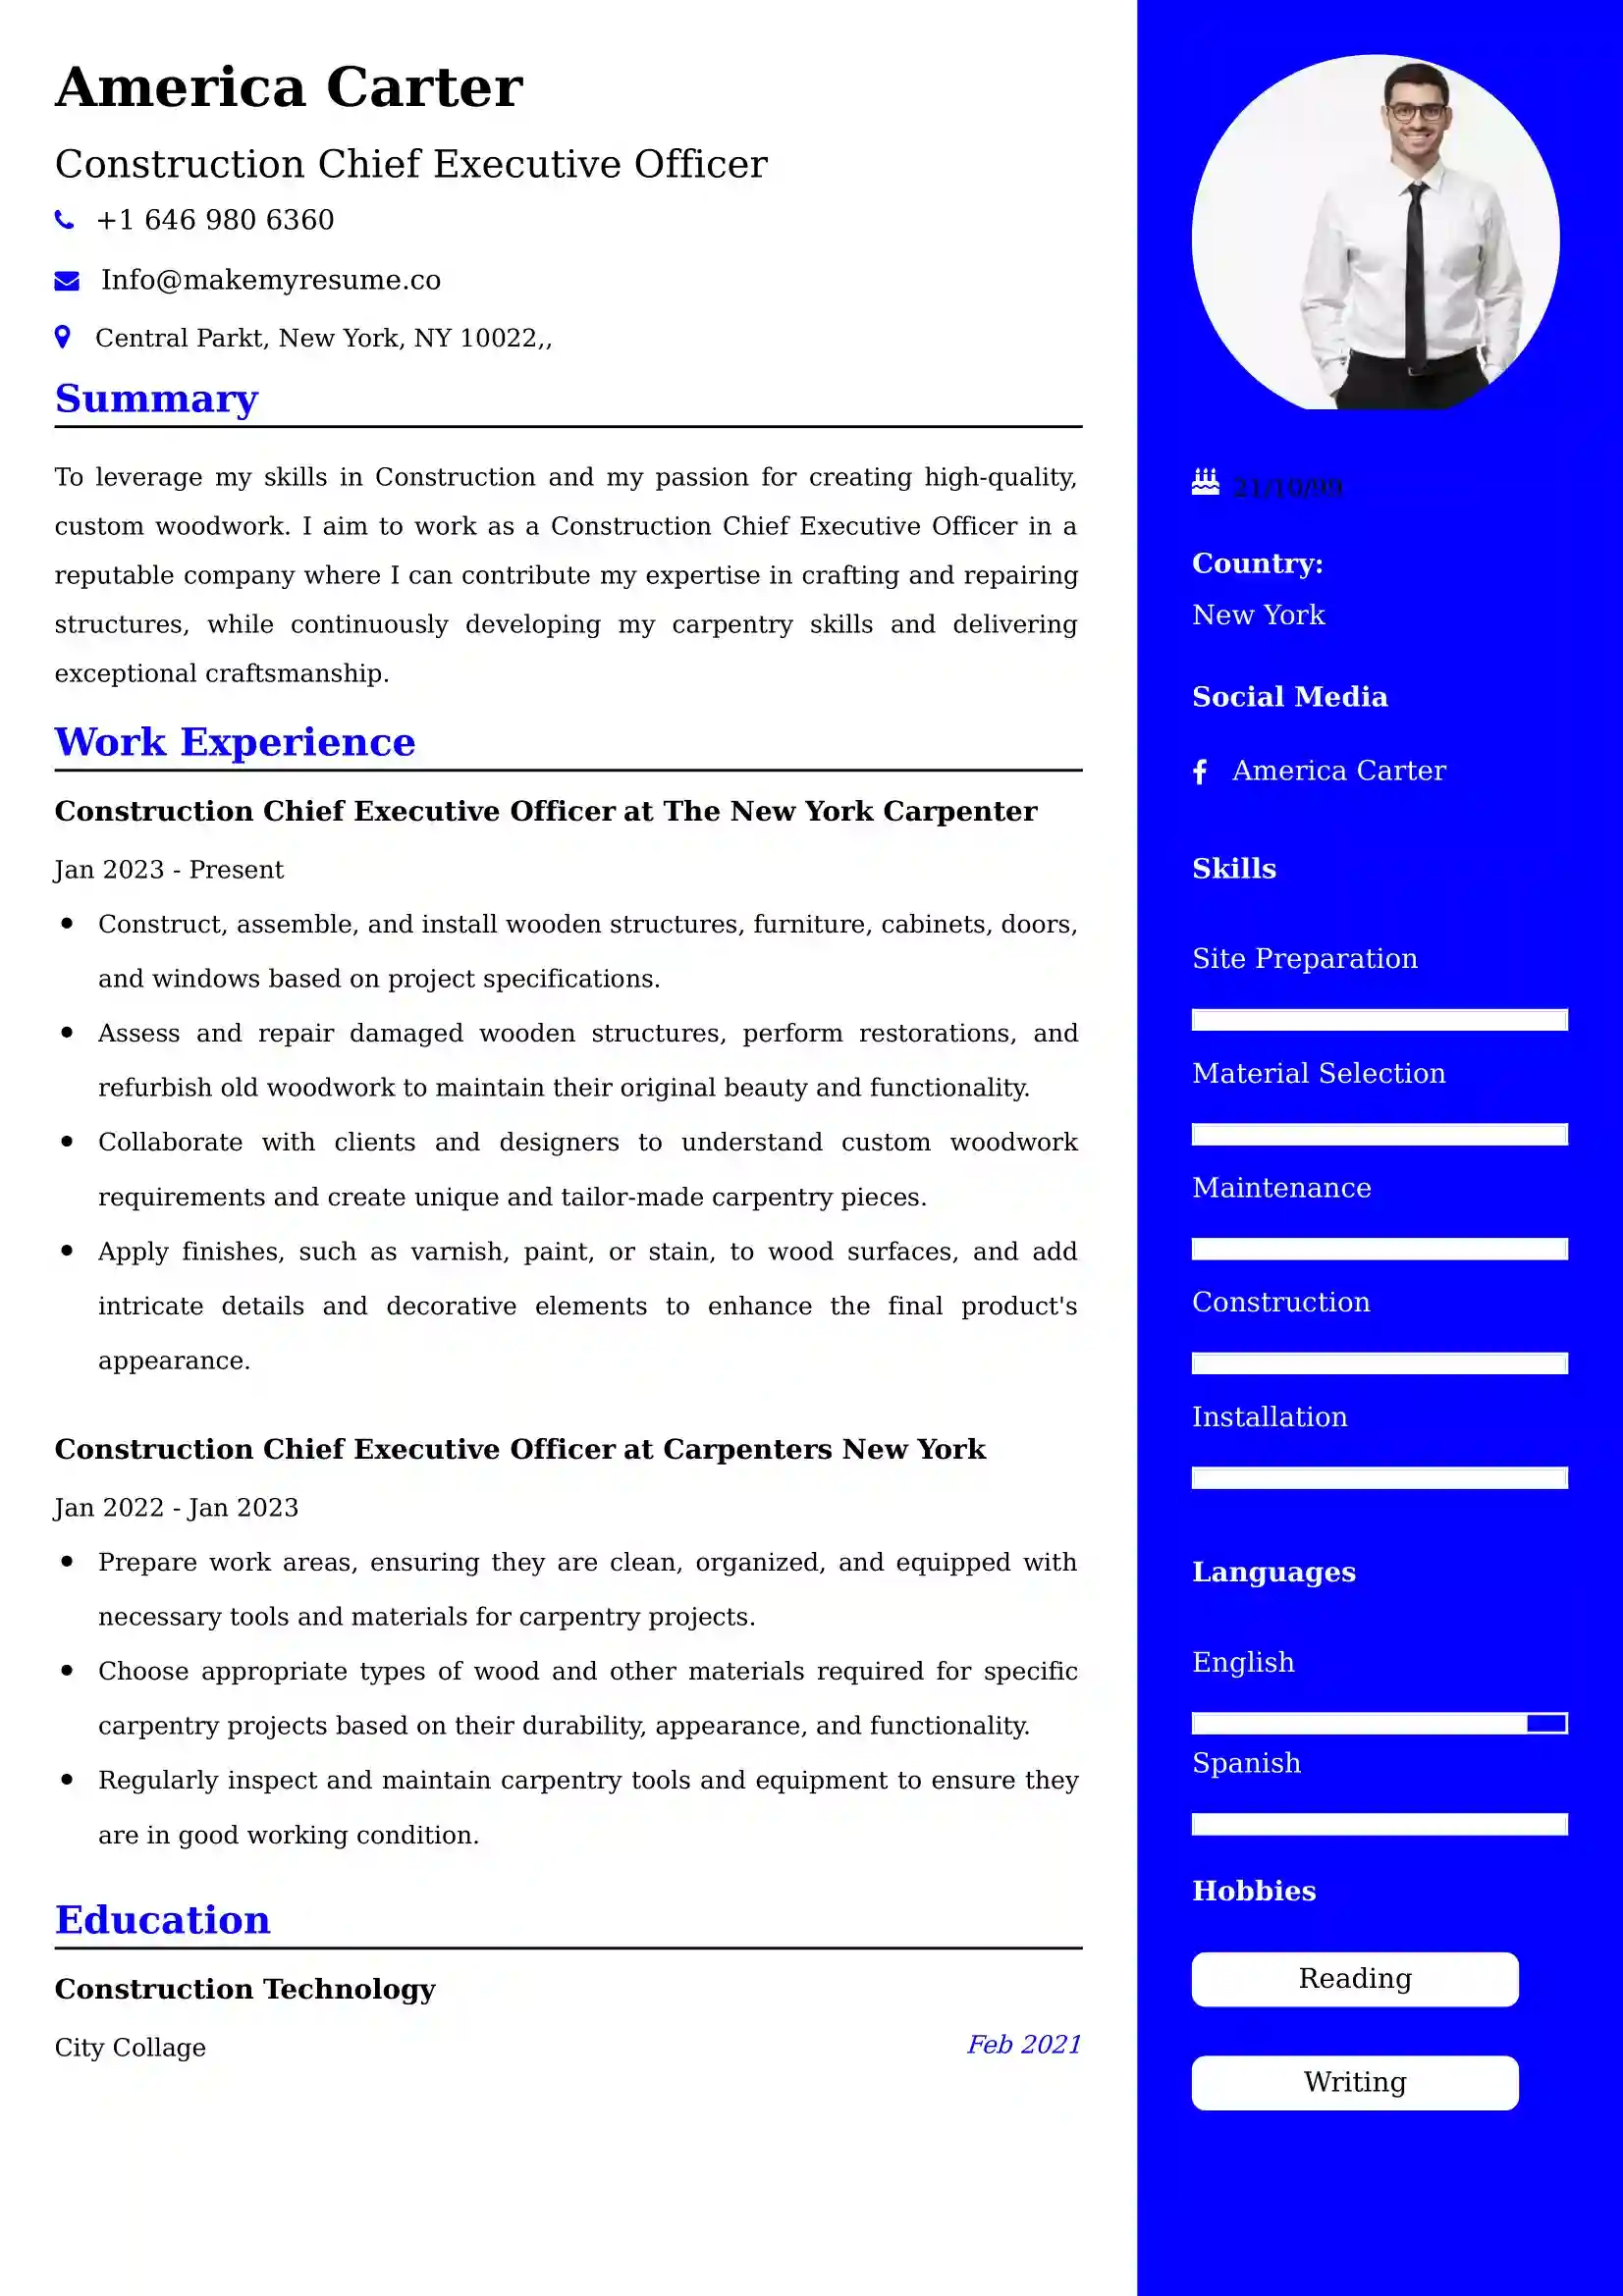 Construction Chief Executive Officer CV Examples - US Format